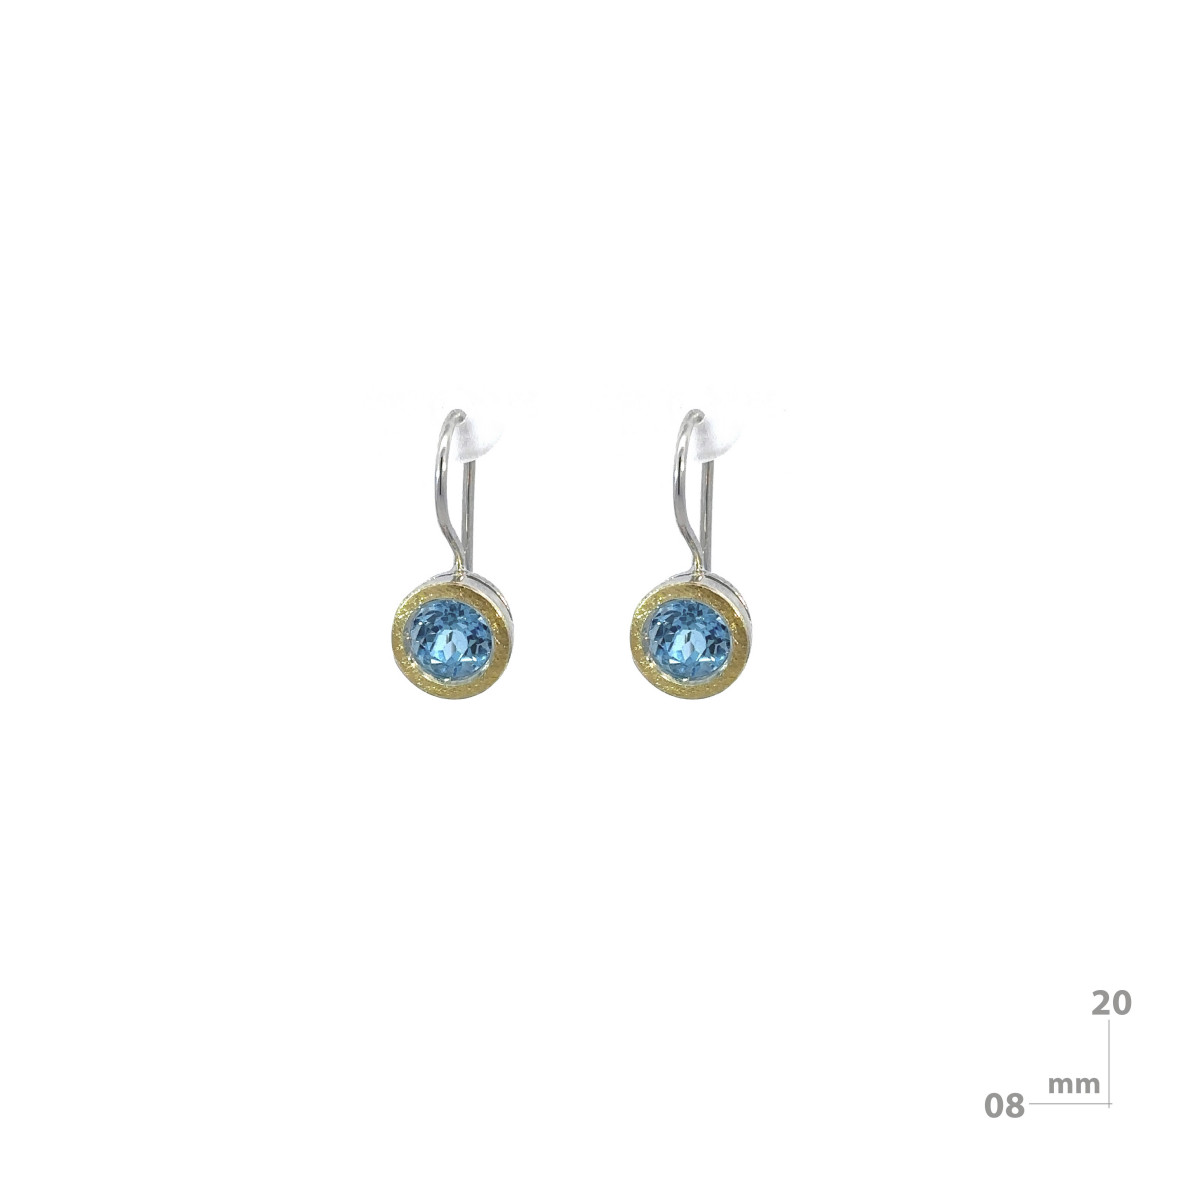 Earrings made of silver, gold and topaz.